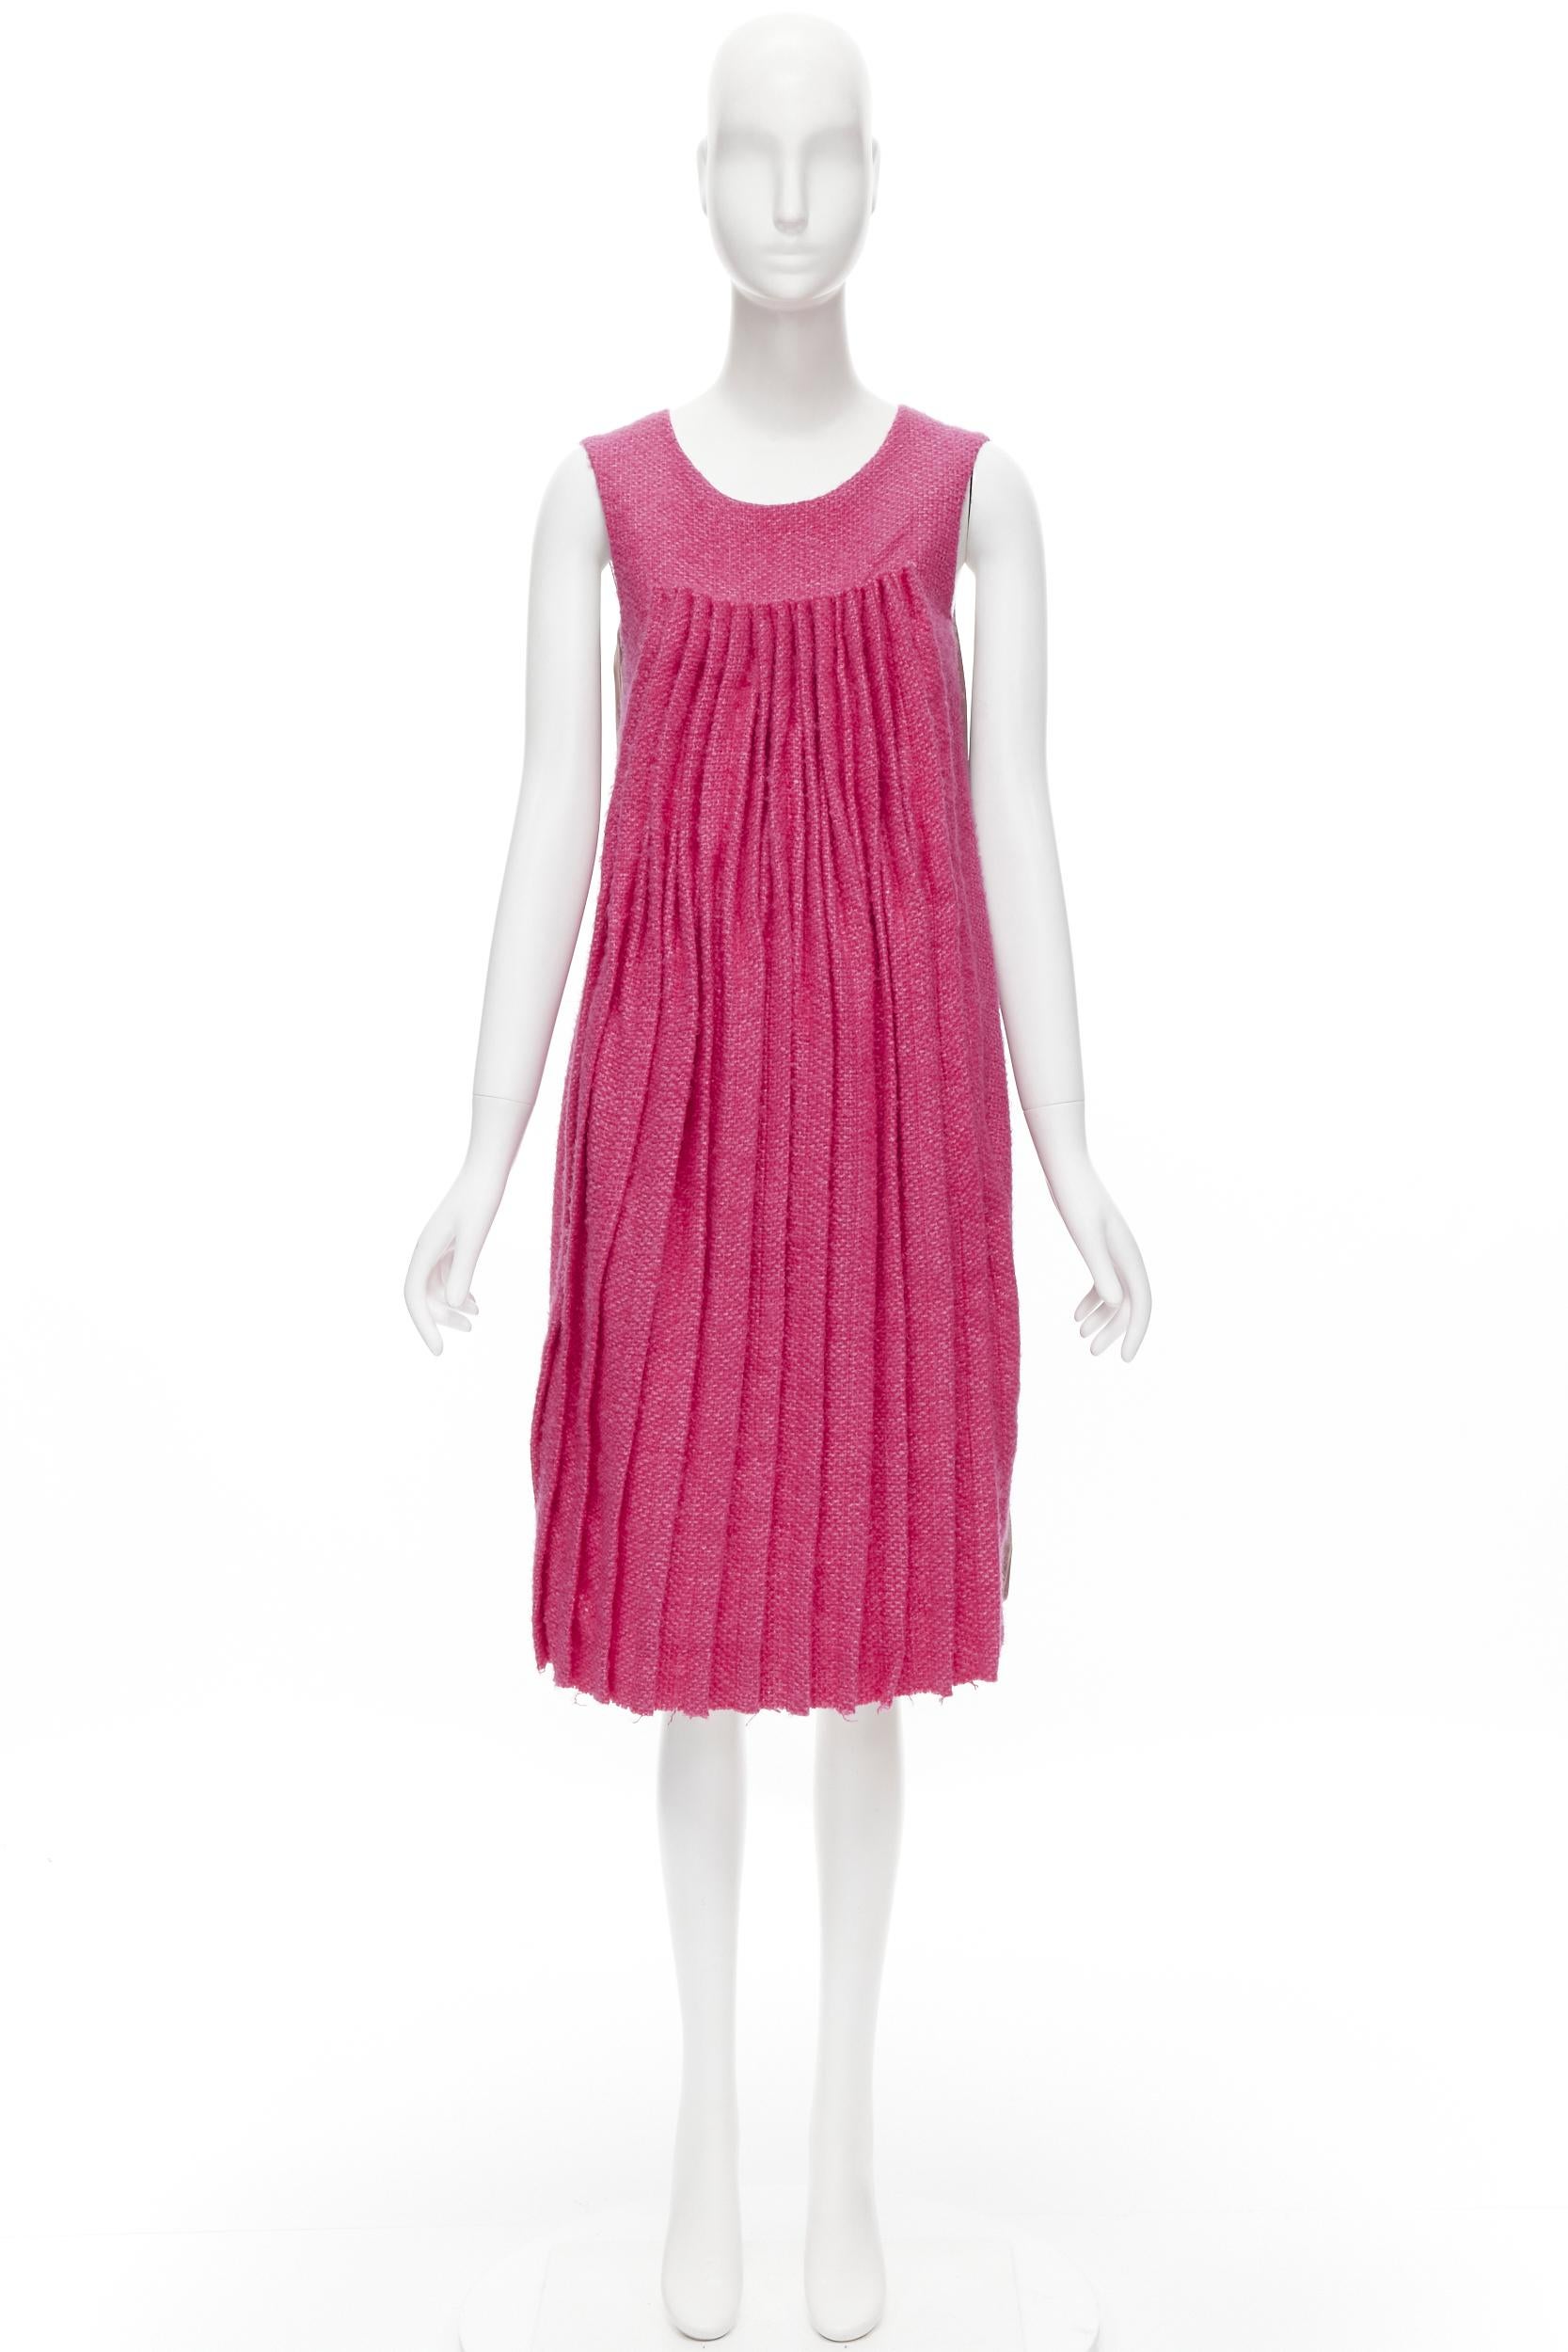 MARNI pink wool tweed gathered pleat contrast back sleeveless dress IT38 XS For Sale 6